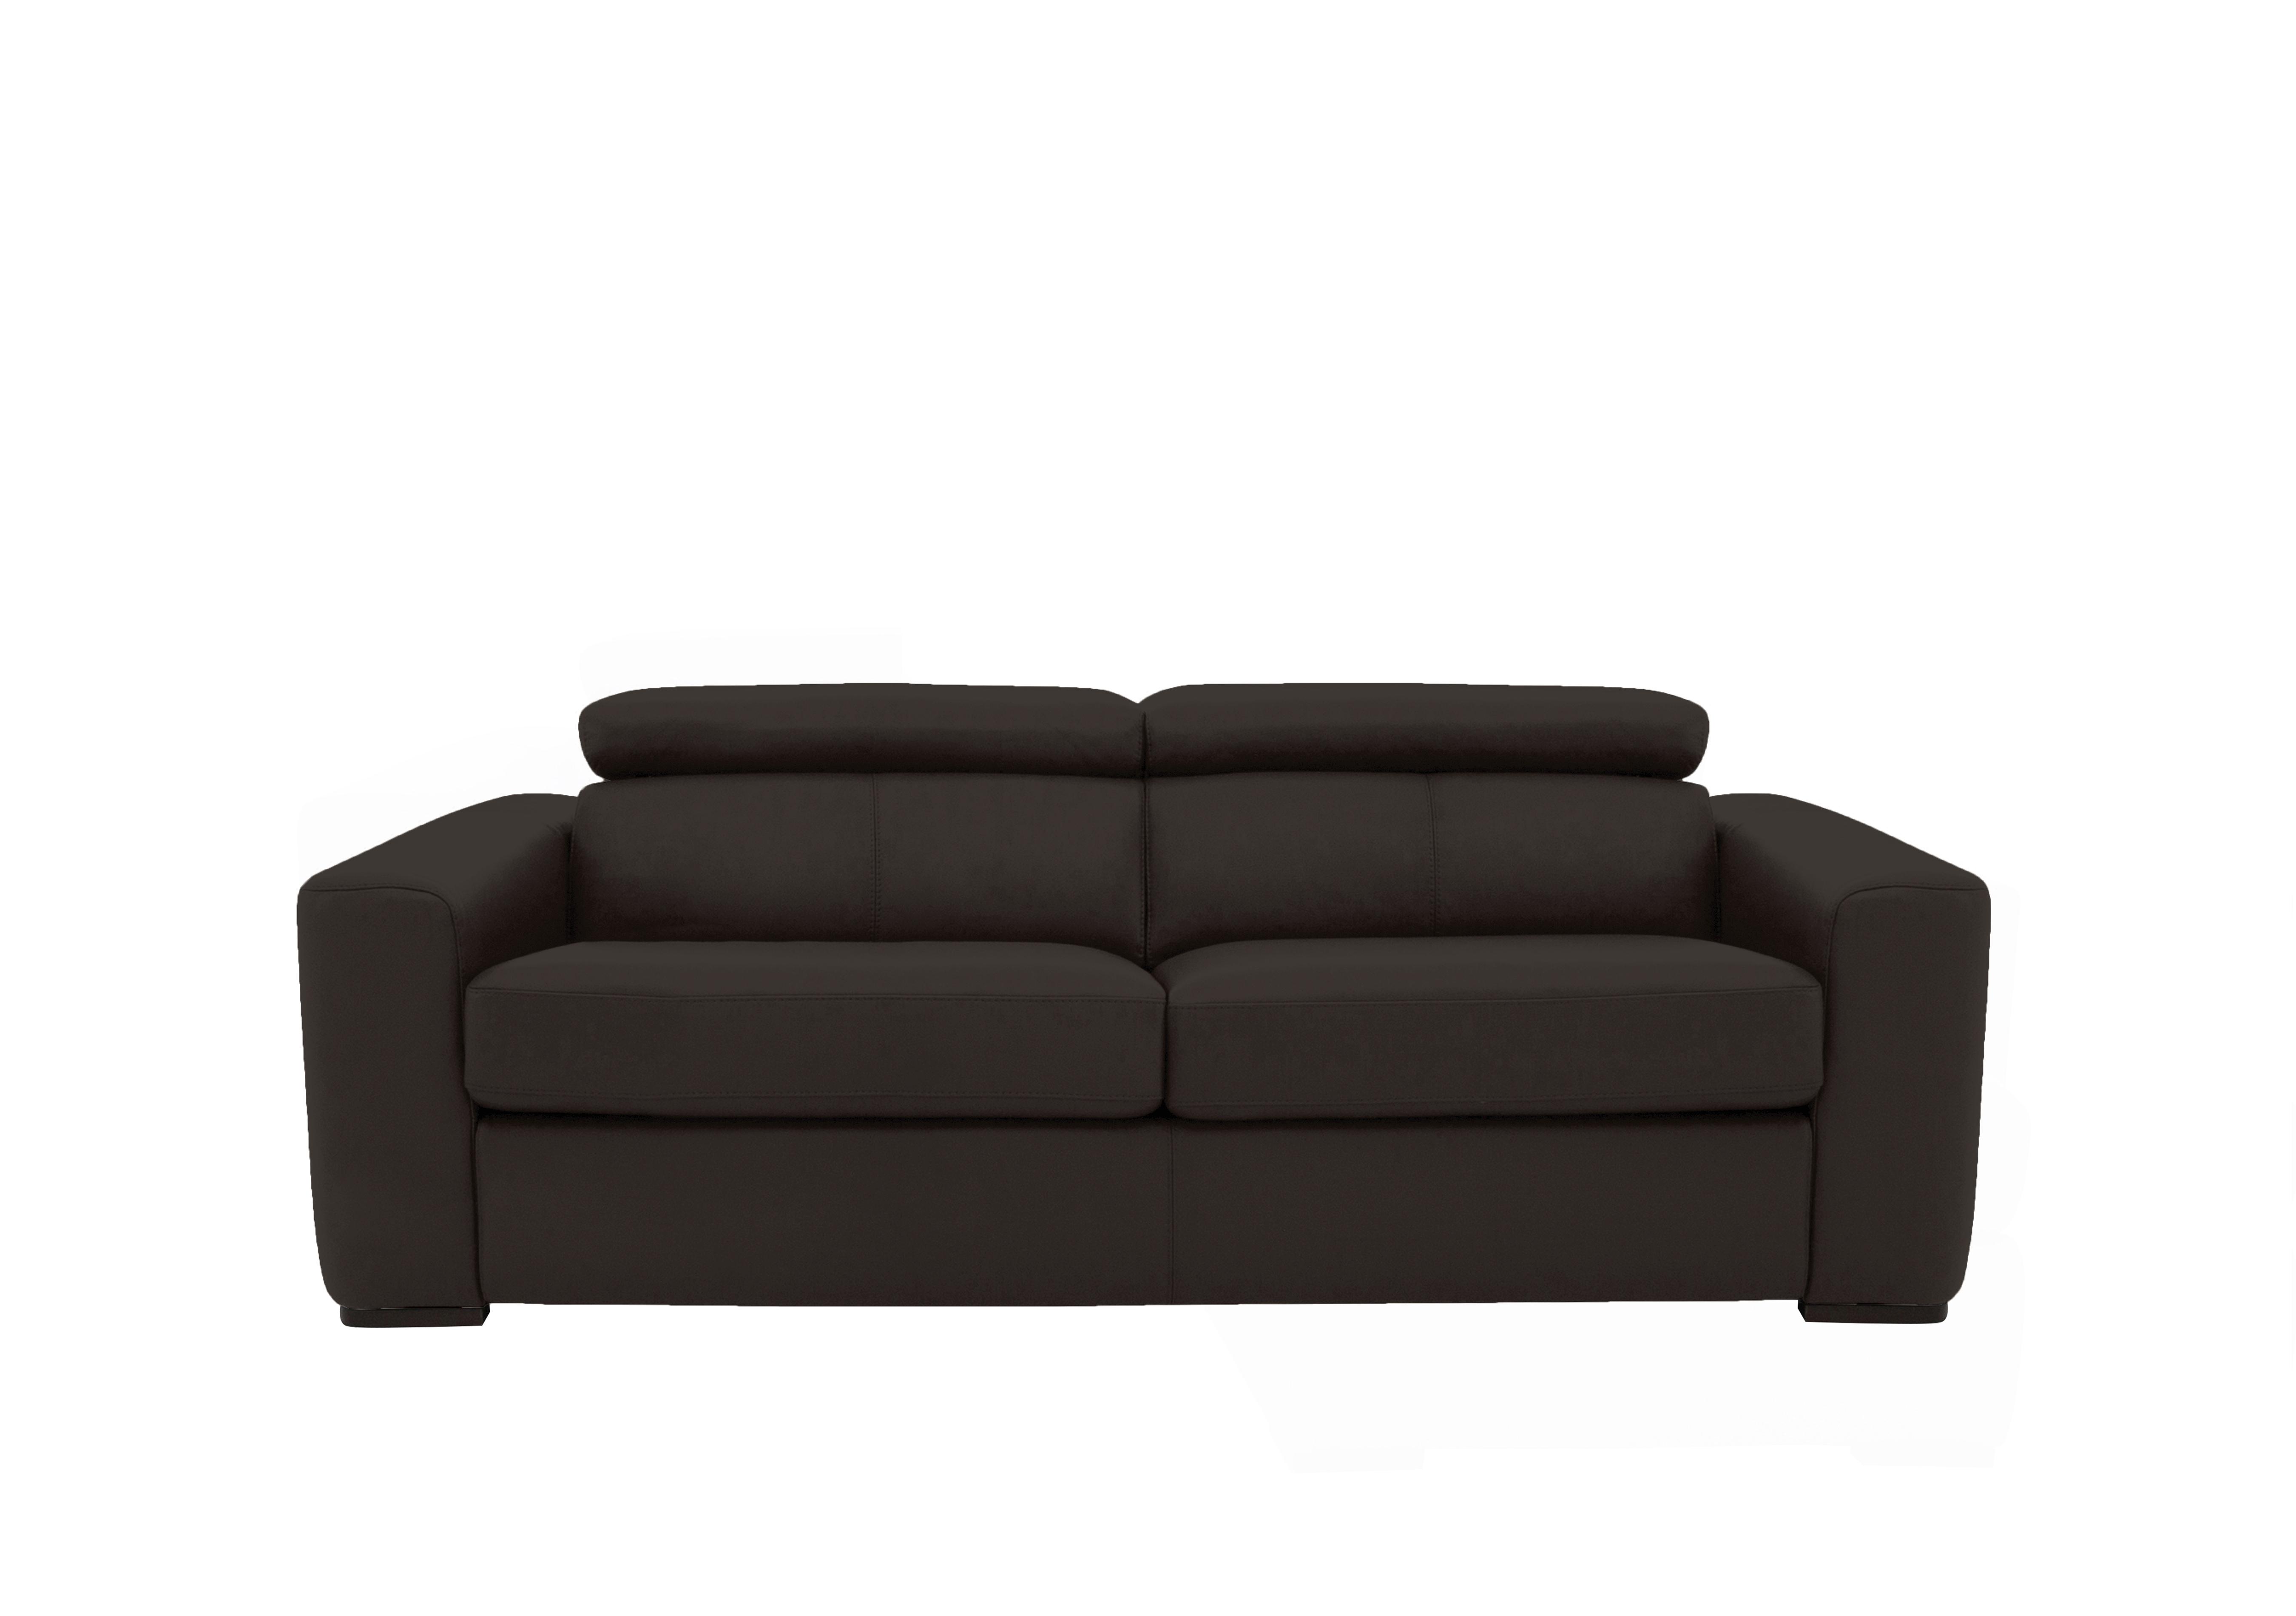 Infinity 3 Seater Leather Sofa Bed in Bv-1748 Dark Chocolate on Furniture Village